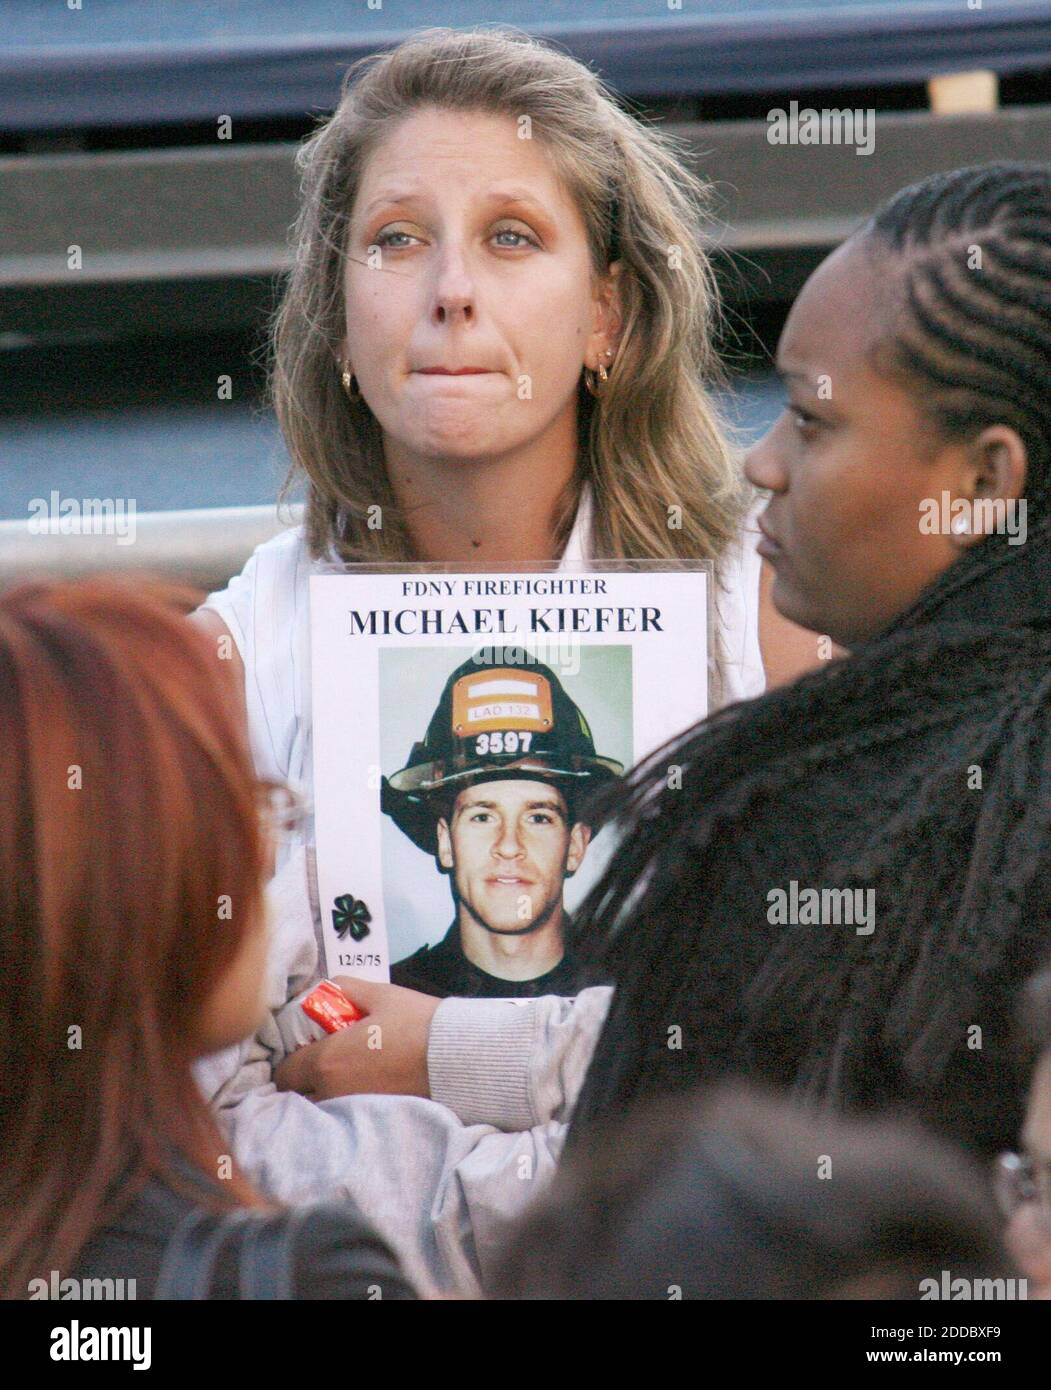 NO FILM, NO VIDEO, NO TV, NO DOCUMENTARY - A woman holds a photo of FDNY firefighter Michael Kiefer at the World Trade Center site during the 2006 September 11th Commemoration Ceremony in New York, New York, Monday, September 11, 2006. Photo by Julia Gaines/Newsday/MCT/ABACAPRESS.COM Stock Photo